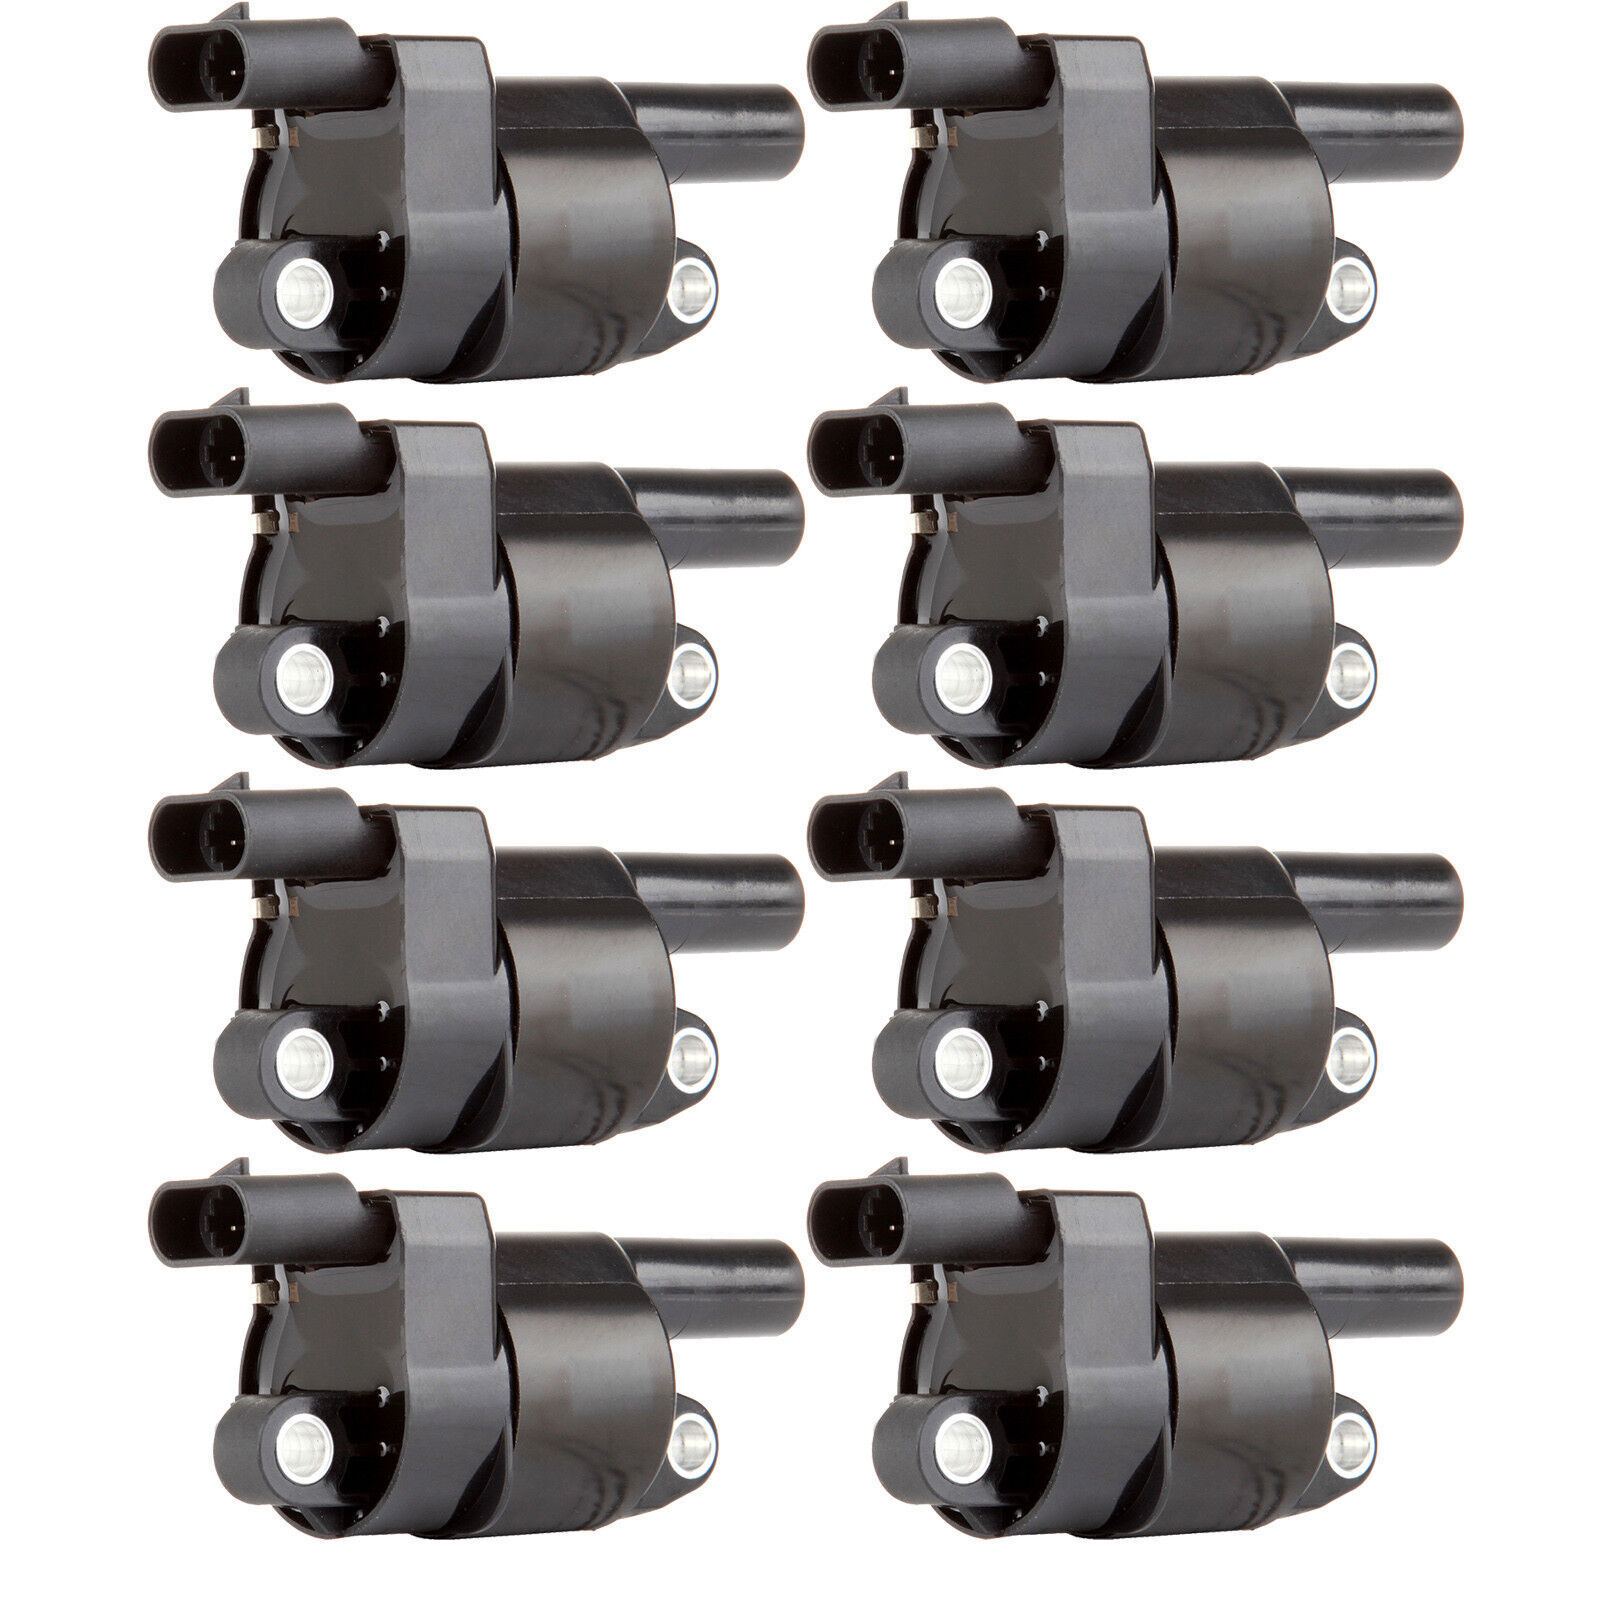 8 X UF414 Round Ignition Coil Pack Fits For Chevy Silverado 1500 Impala Tahoe